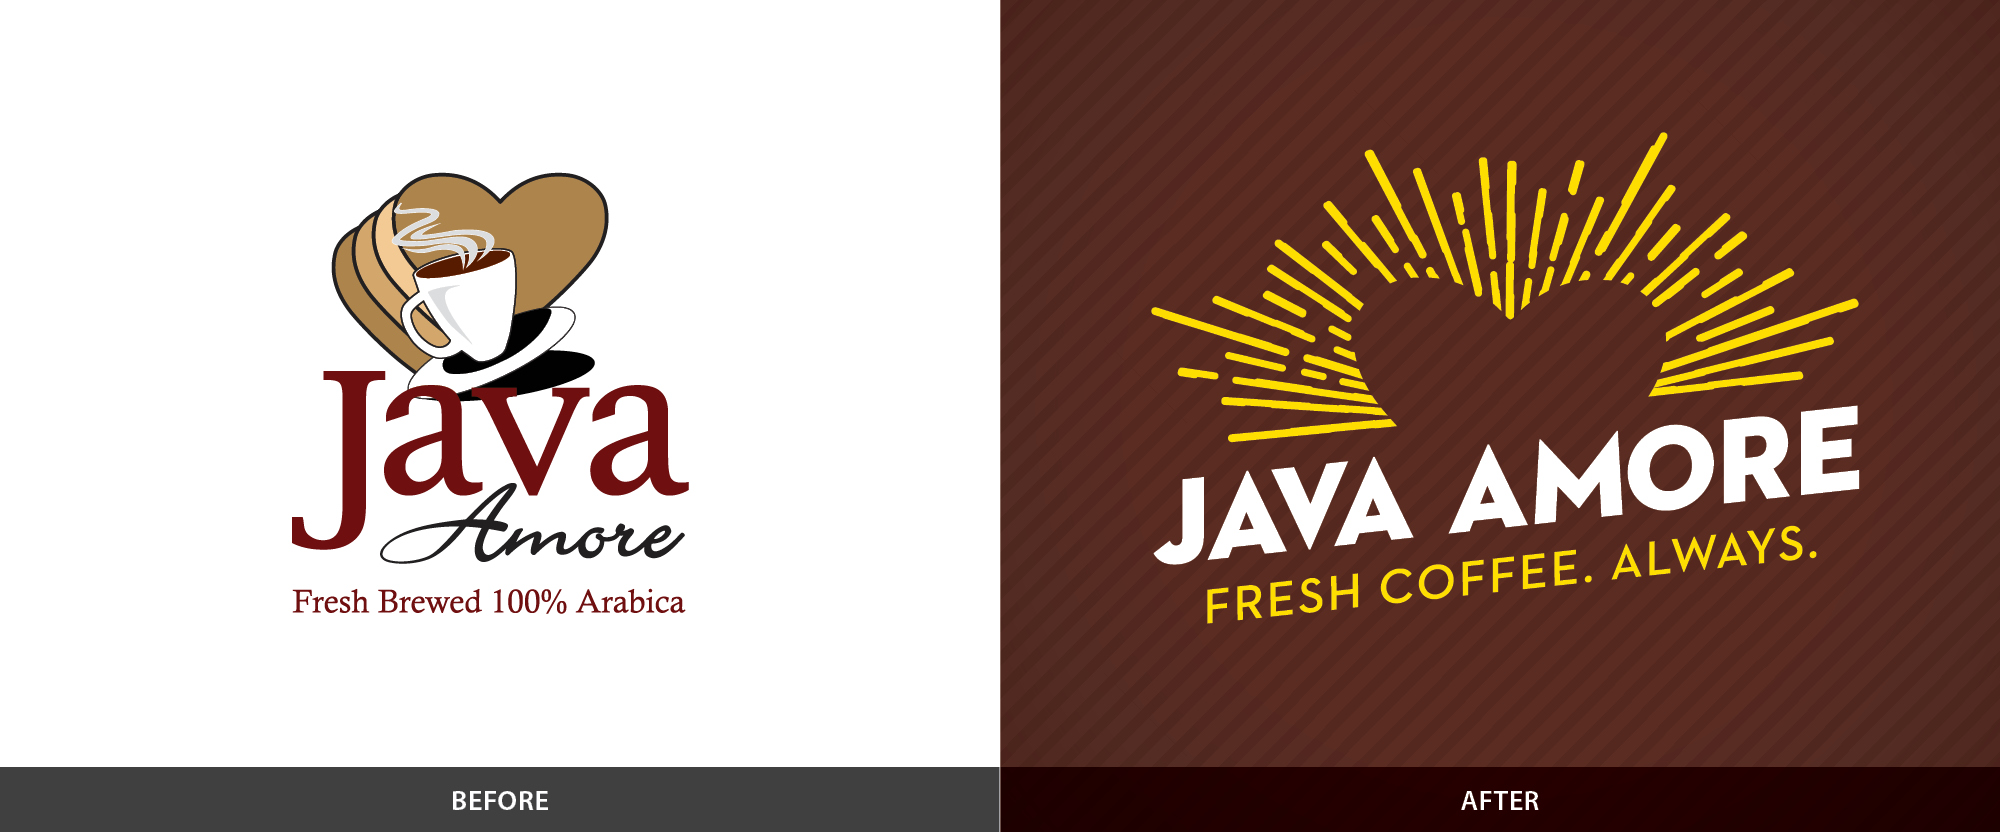 Love's Java Amore - Logo - Before and After